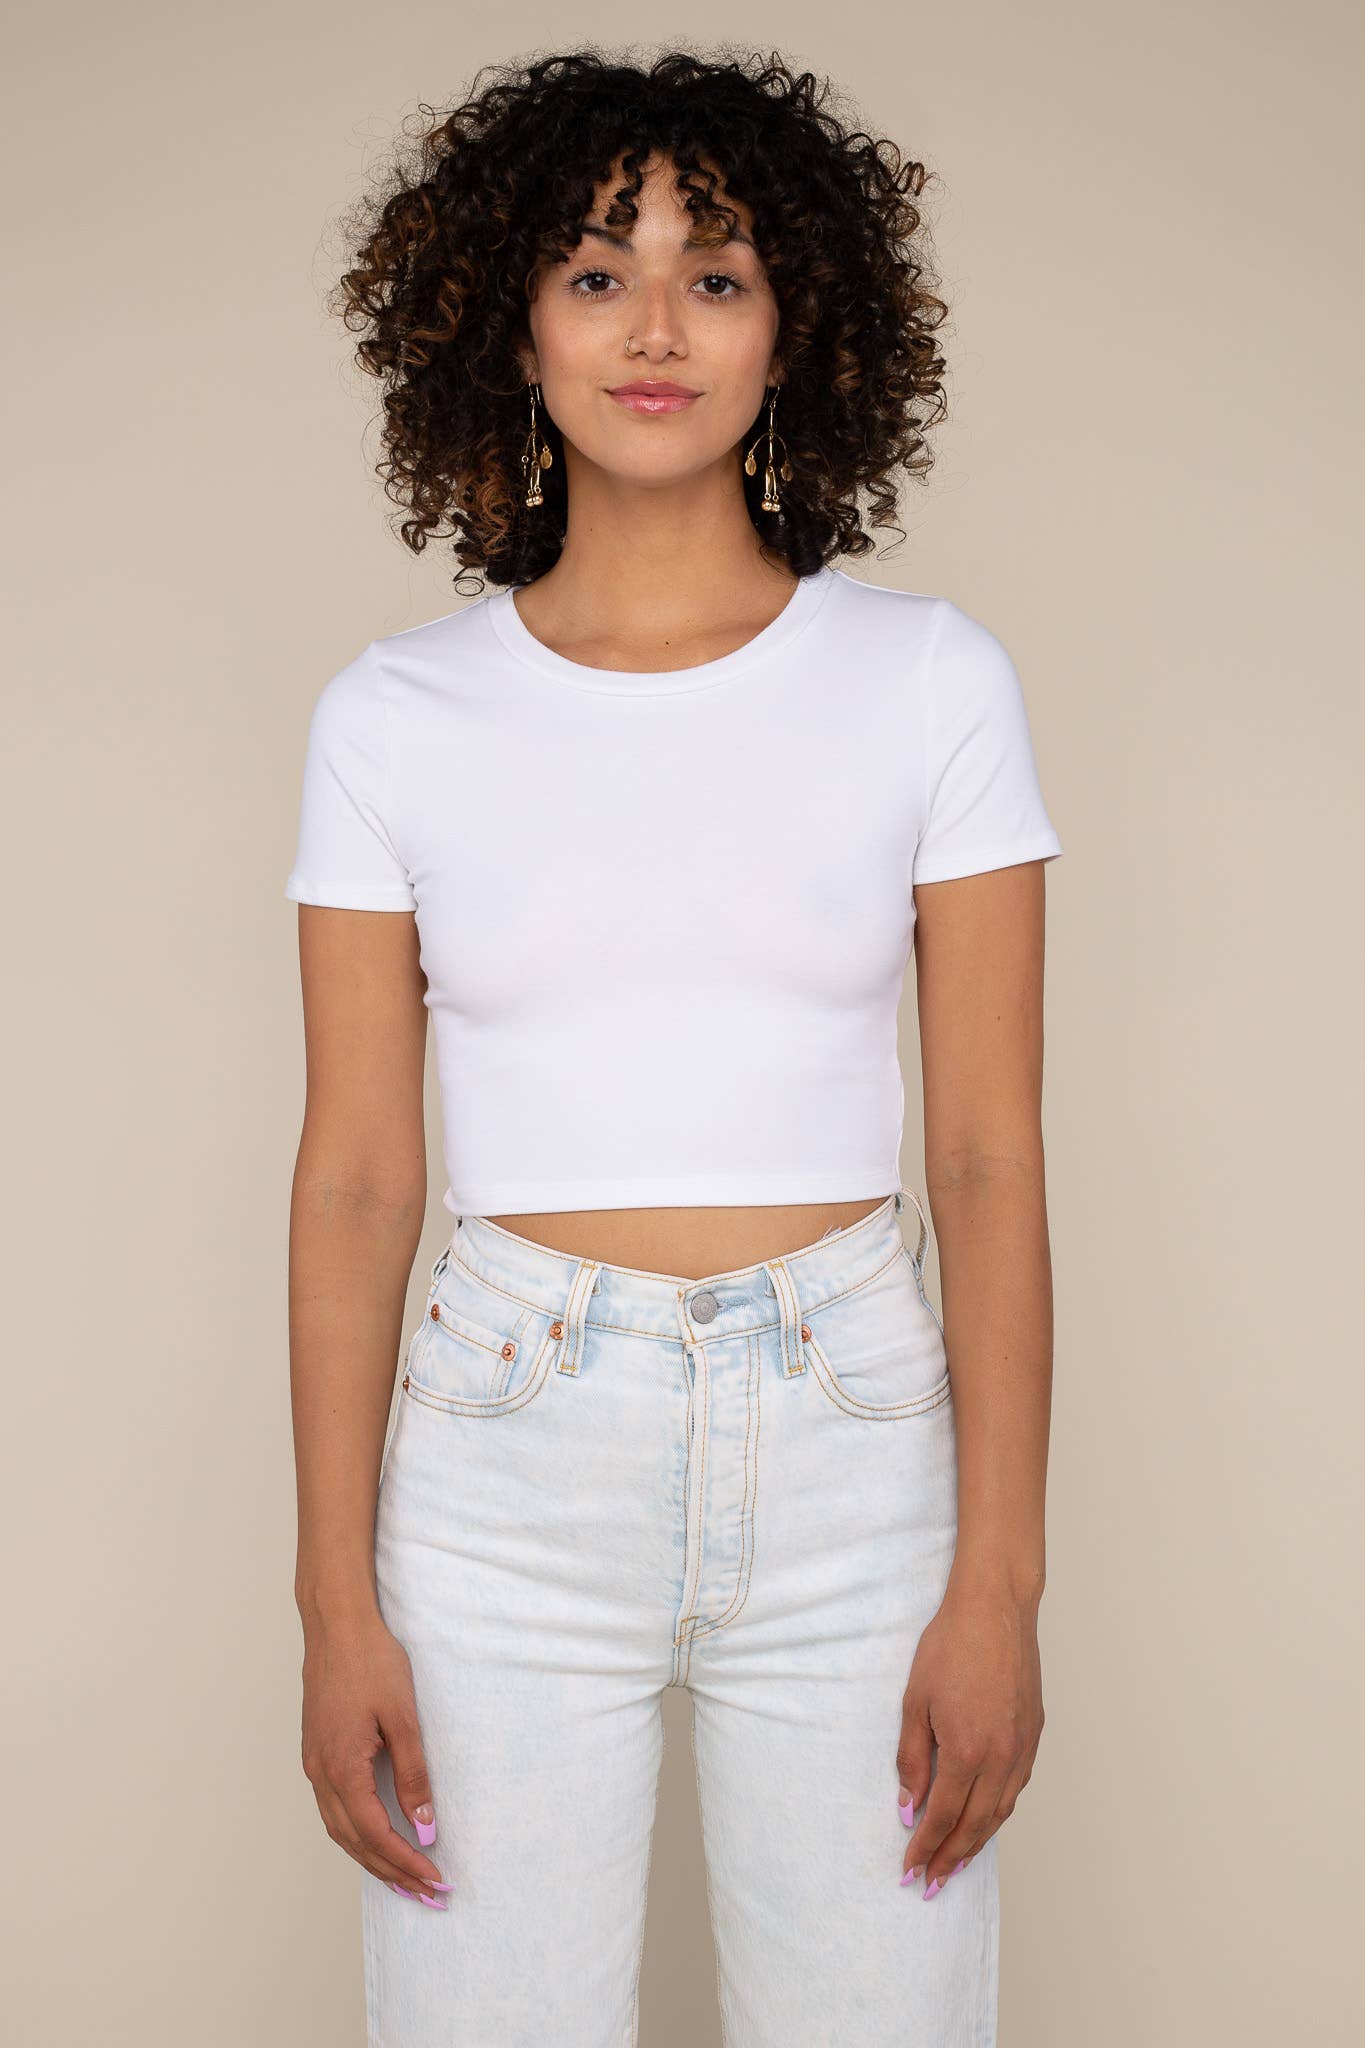 Cotton Spandex Cropped Baby Tee